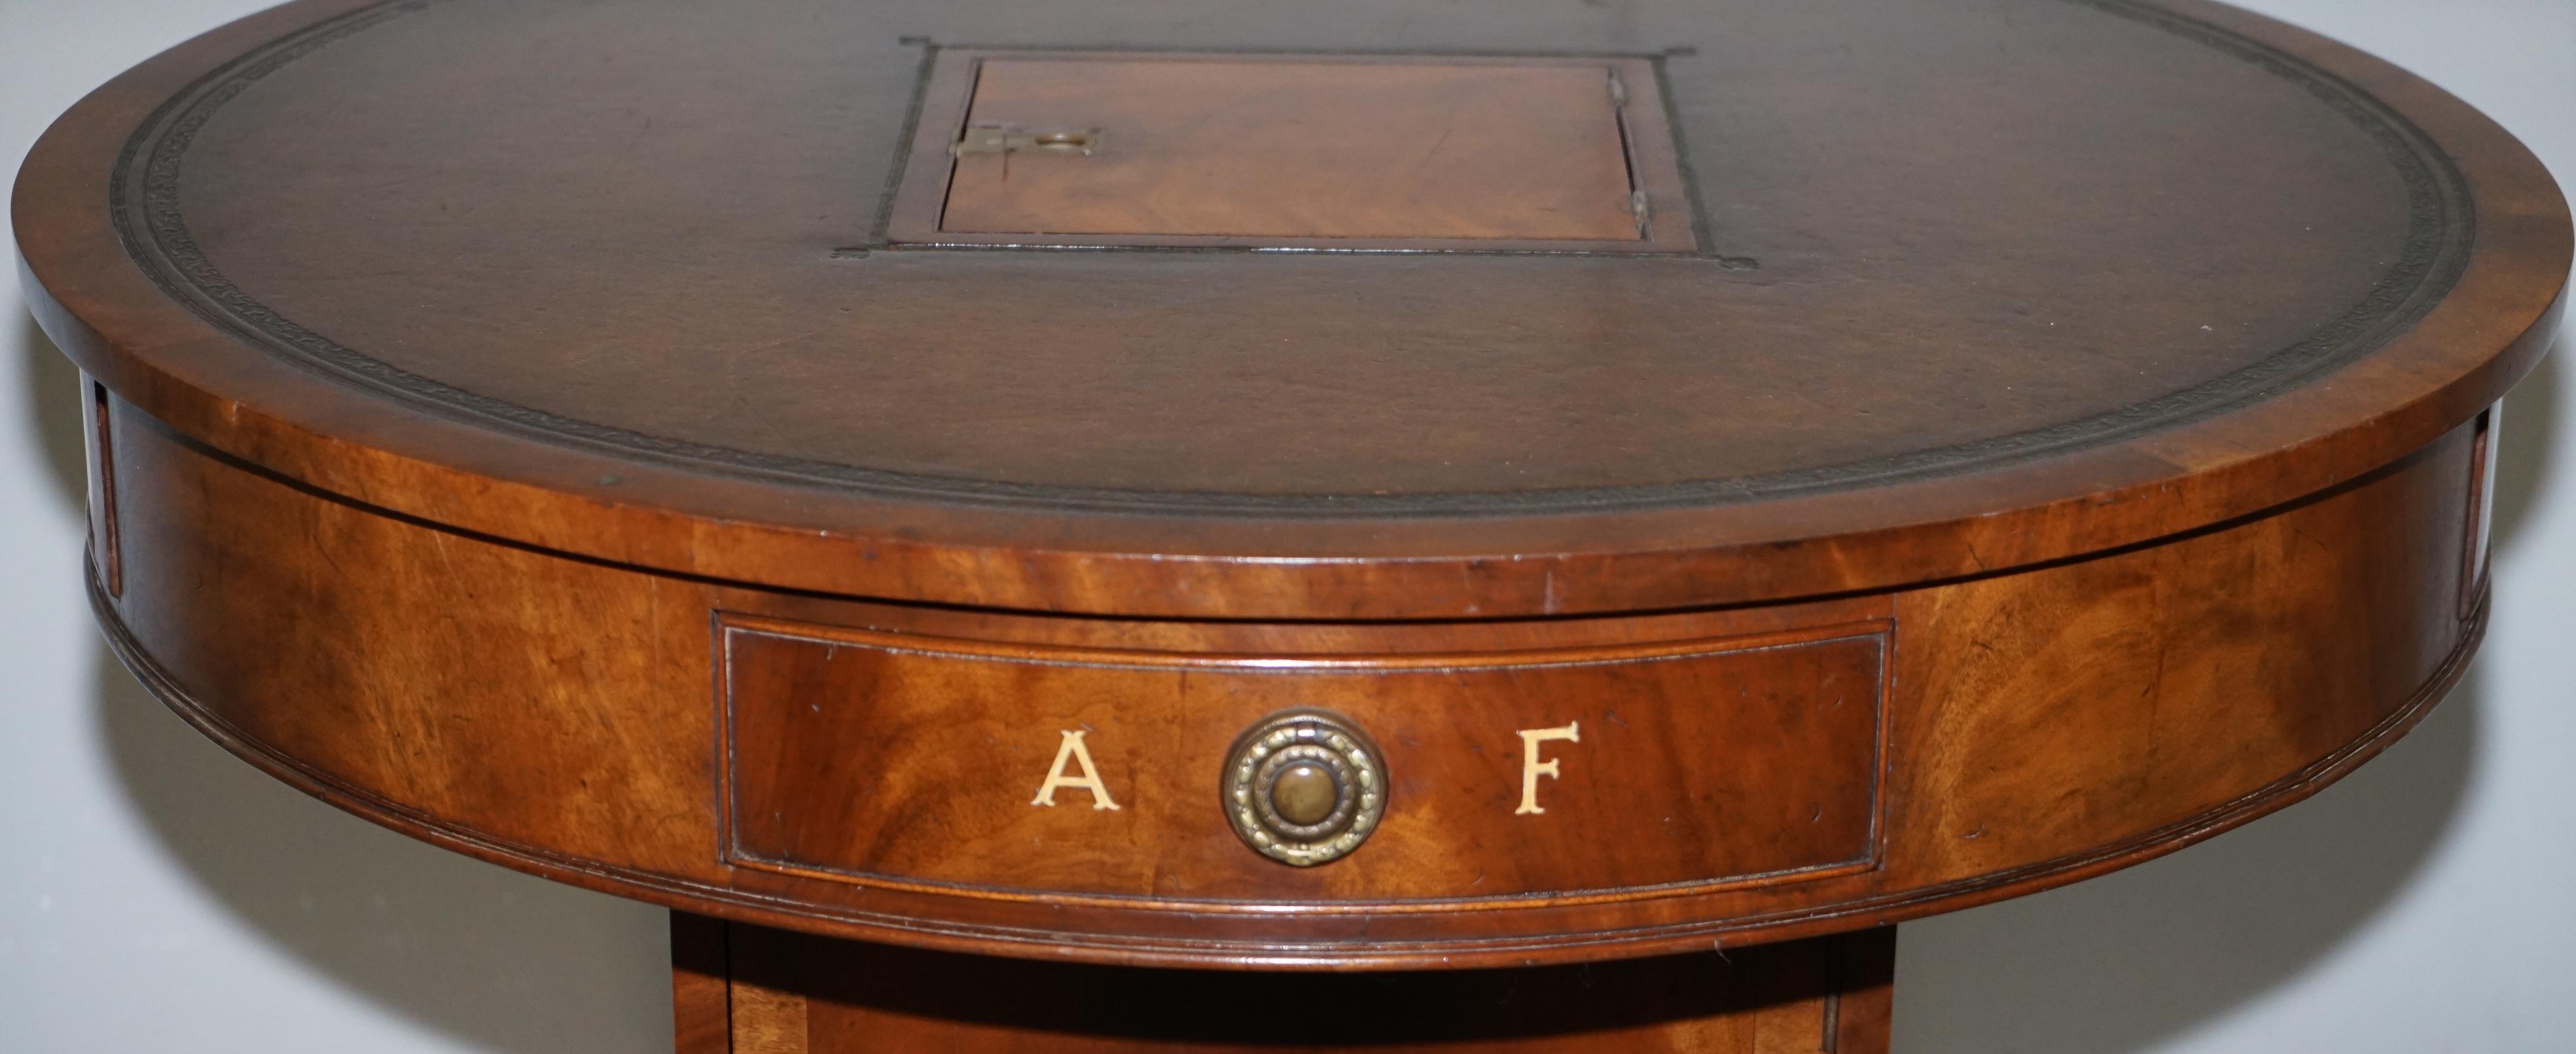 Antique Victorian Flamed Hardwood Revolving Rent Drum Table Brown Leather Top For Sale 7